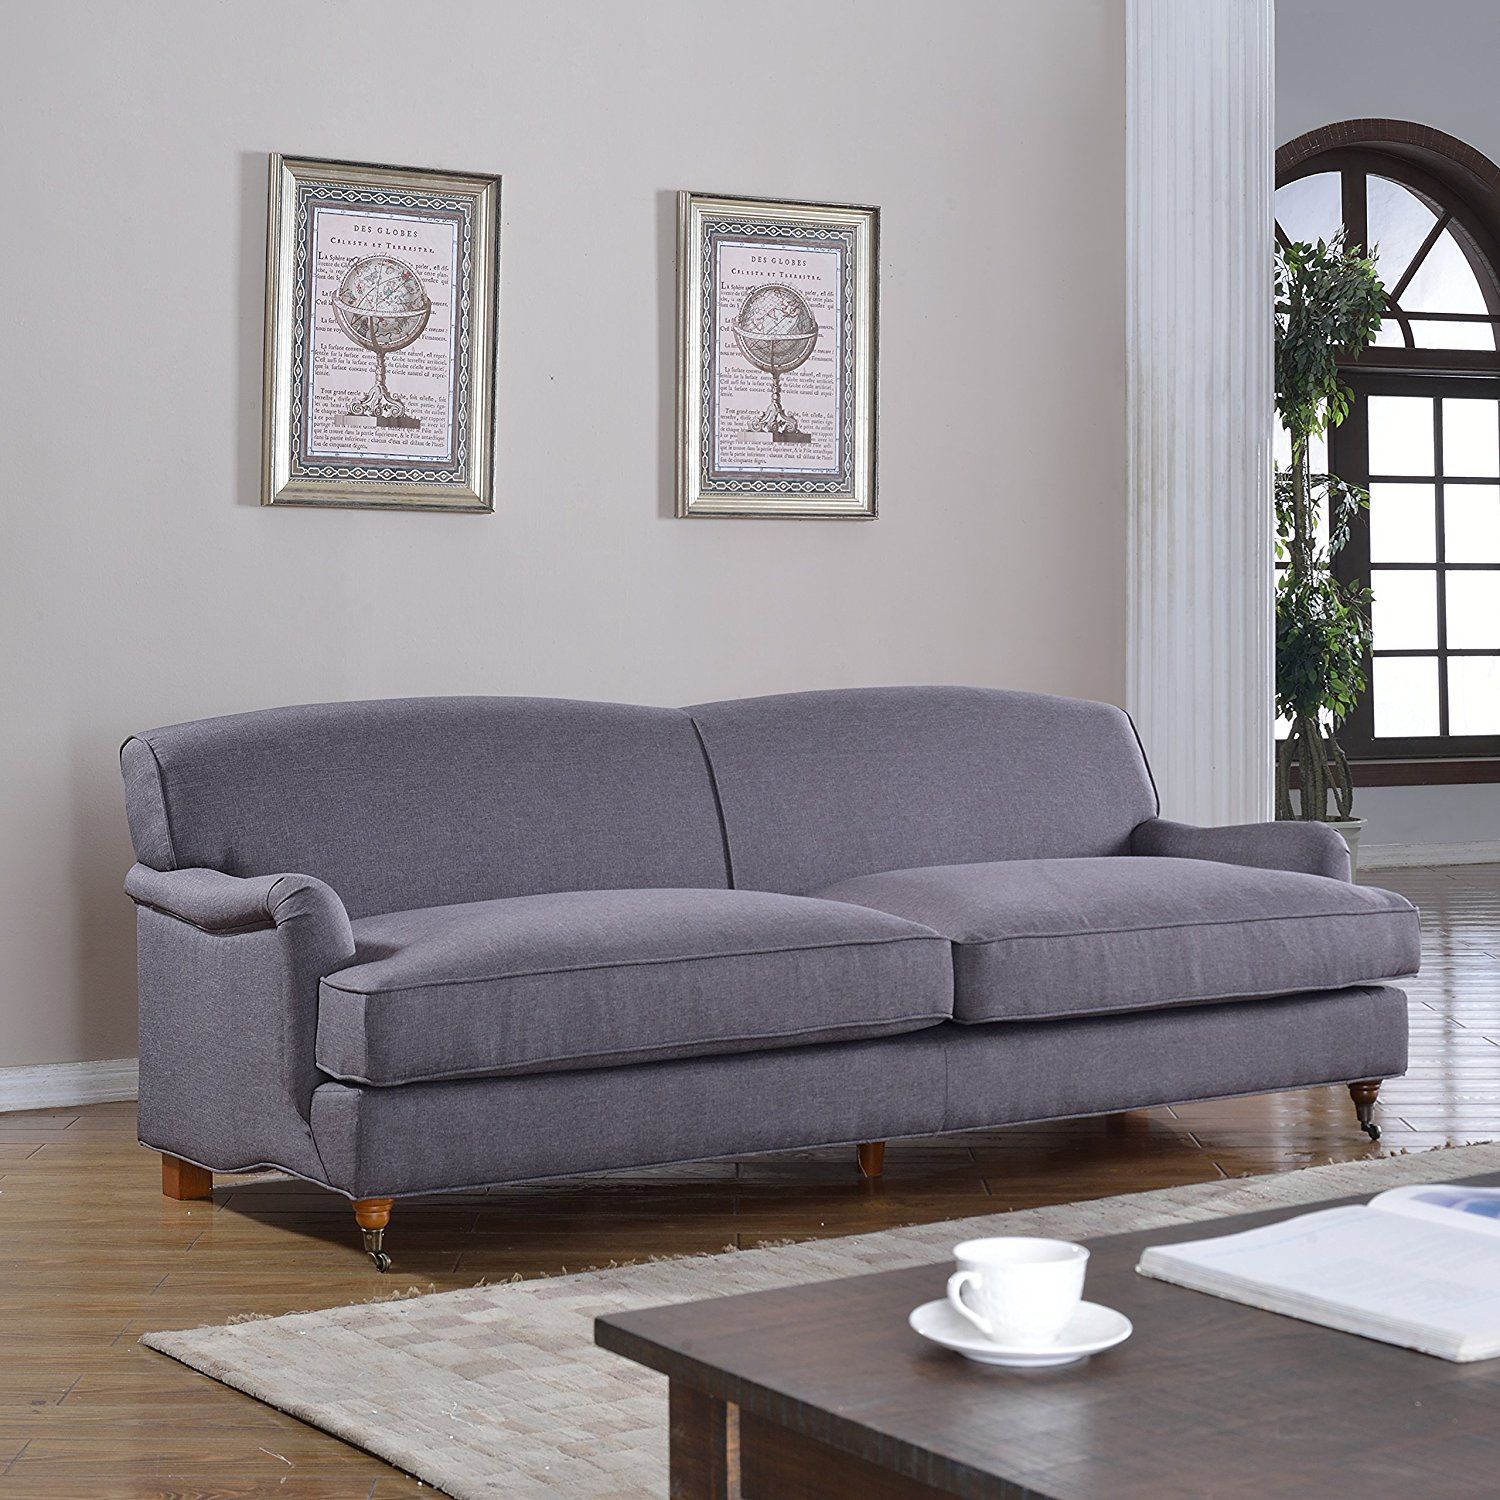 Amazon: Mid Century Grey Modern Sophisticated Large Linen Fabric Throughout Gray Linen Sofas (Gallery 5 of 20)